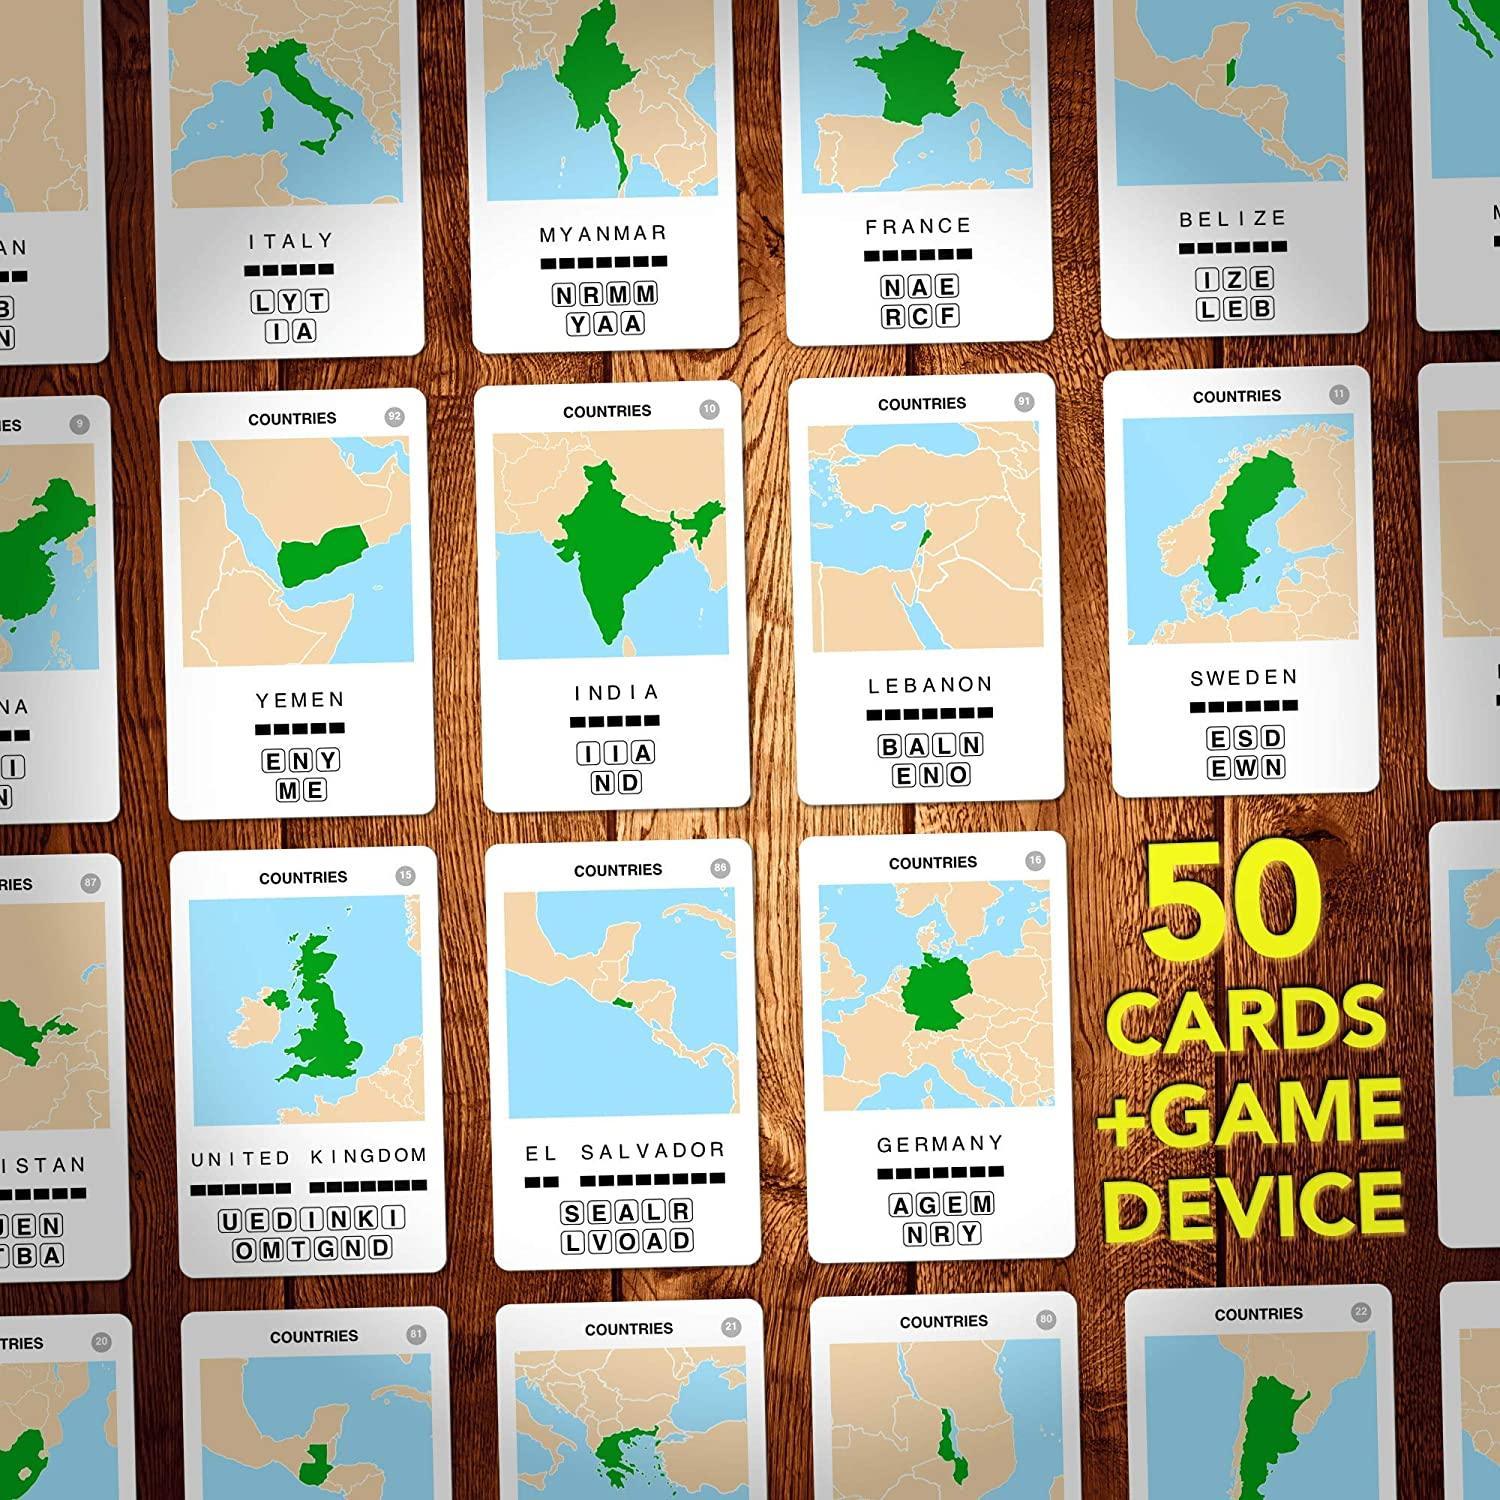 100 PICS - Countries - The Card Vault